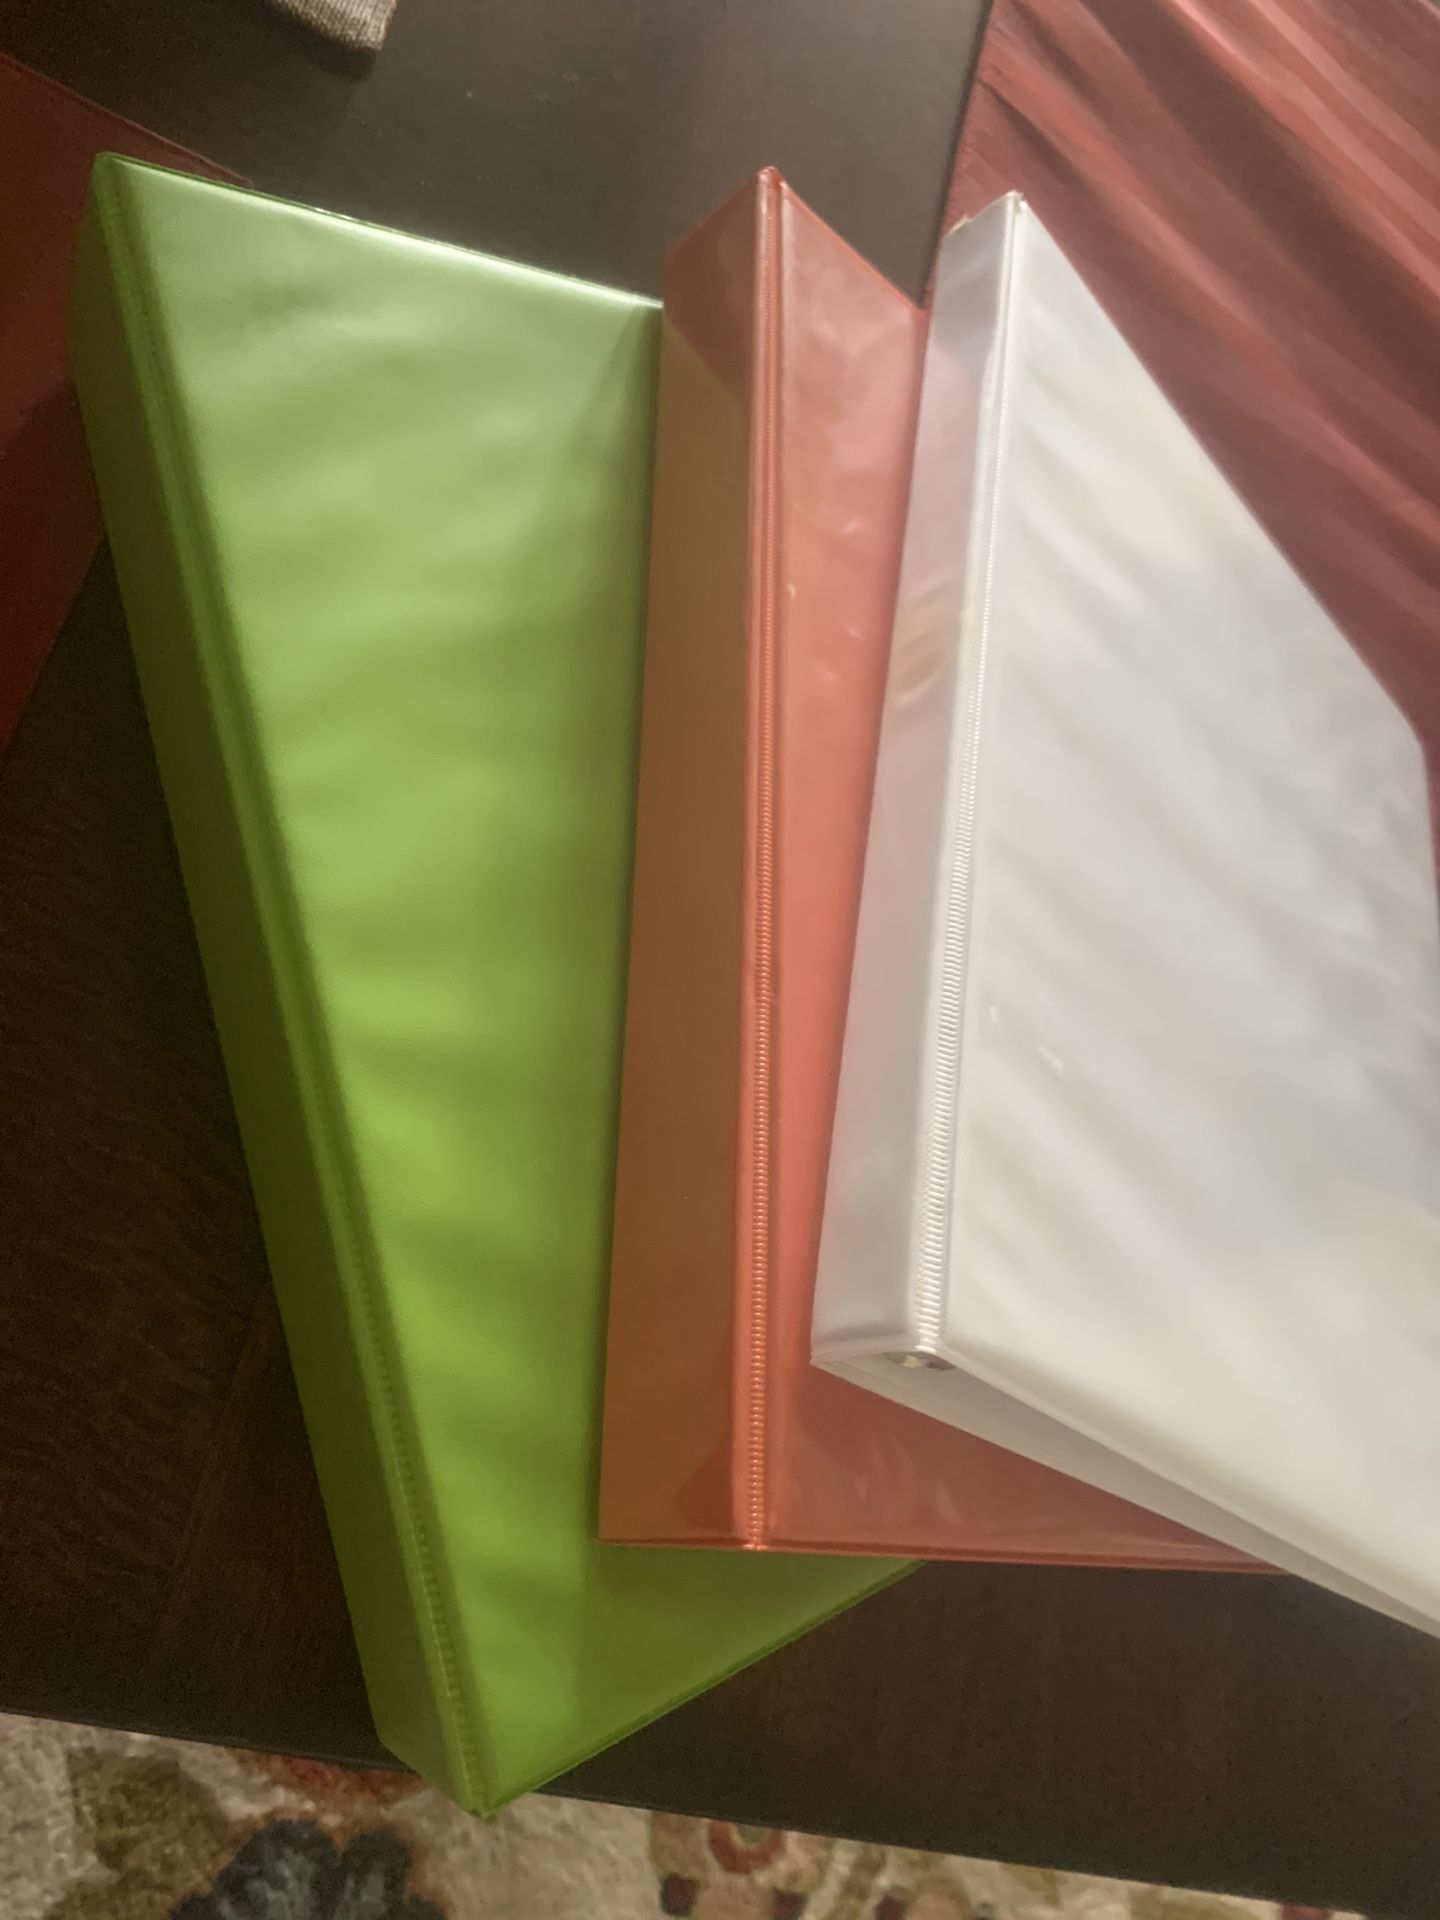 Binders (various sizes and colors)